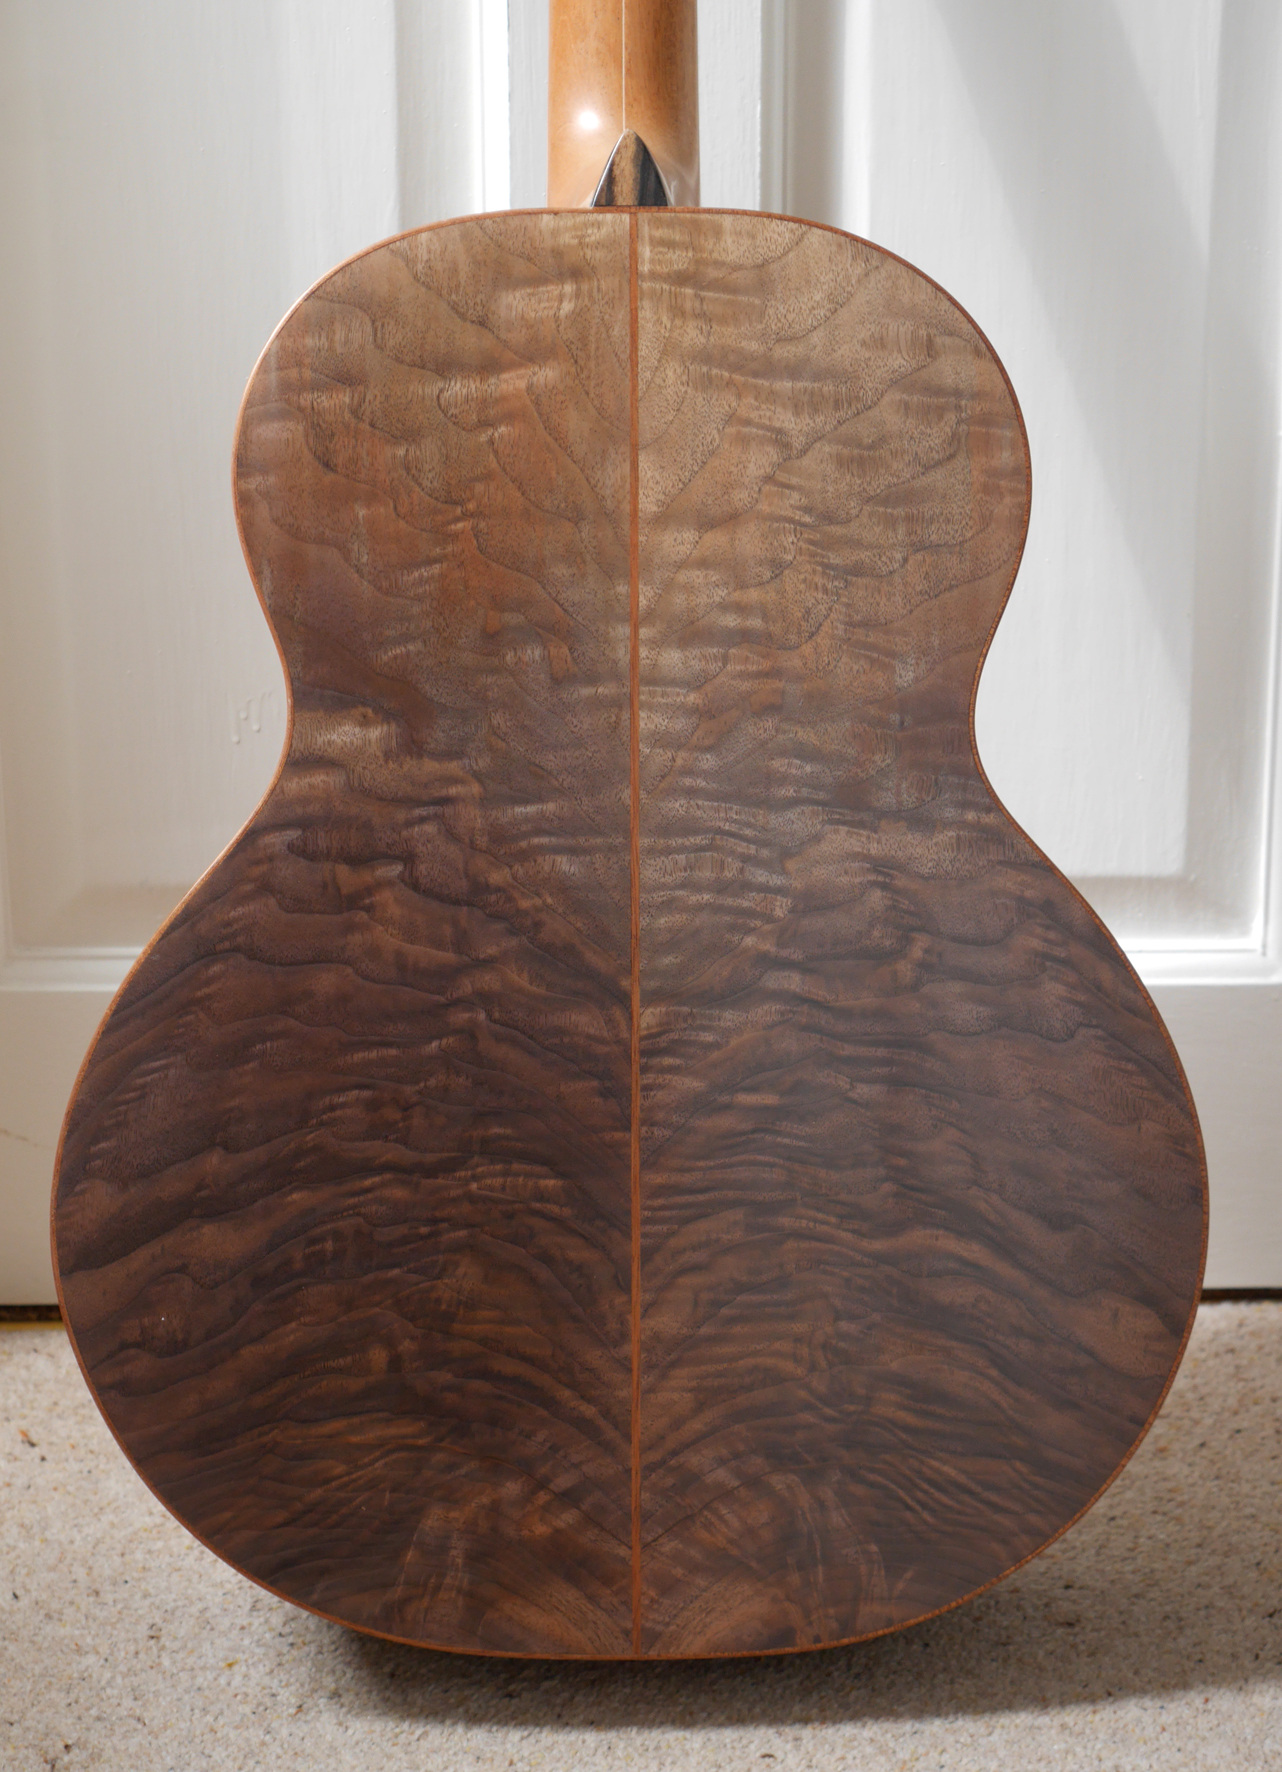 andreas montgomery, figured walnut, acoustic, Montgomery guitars, luthier